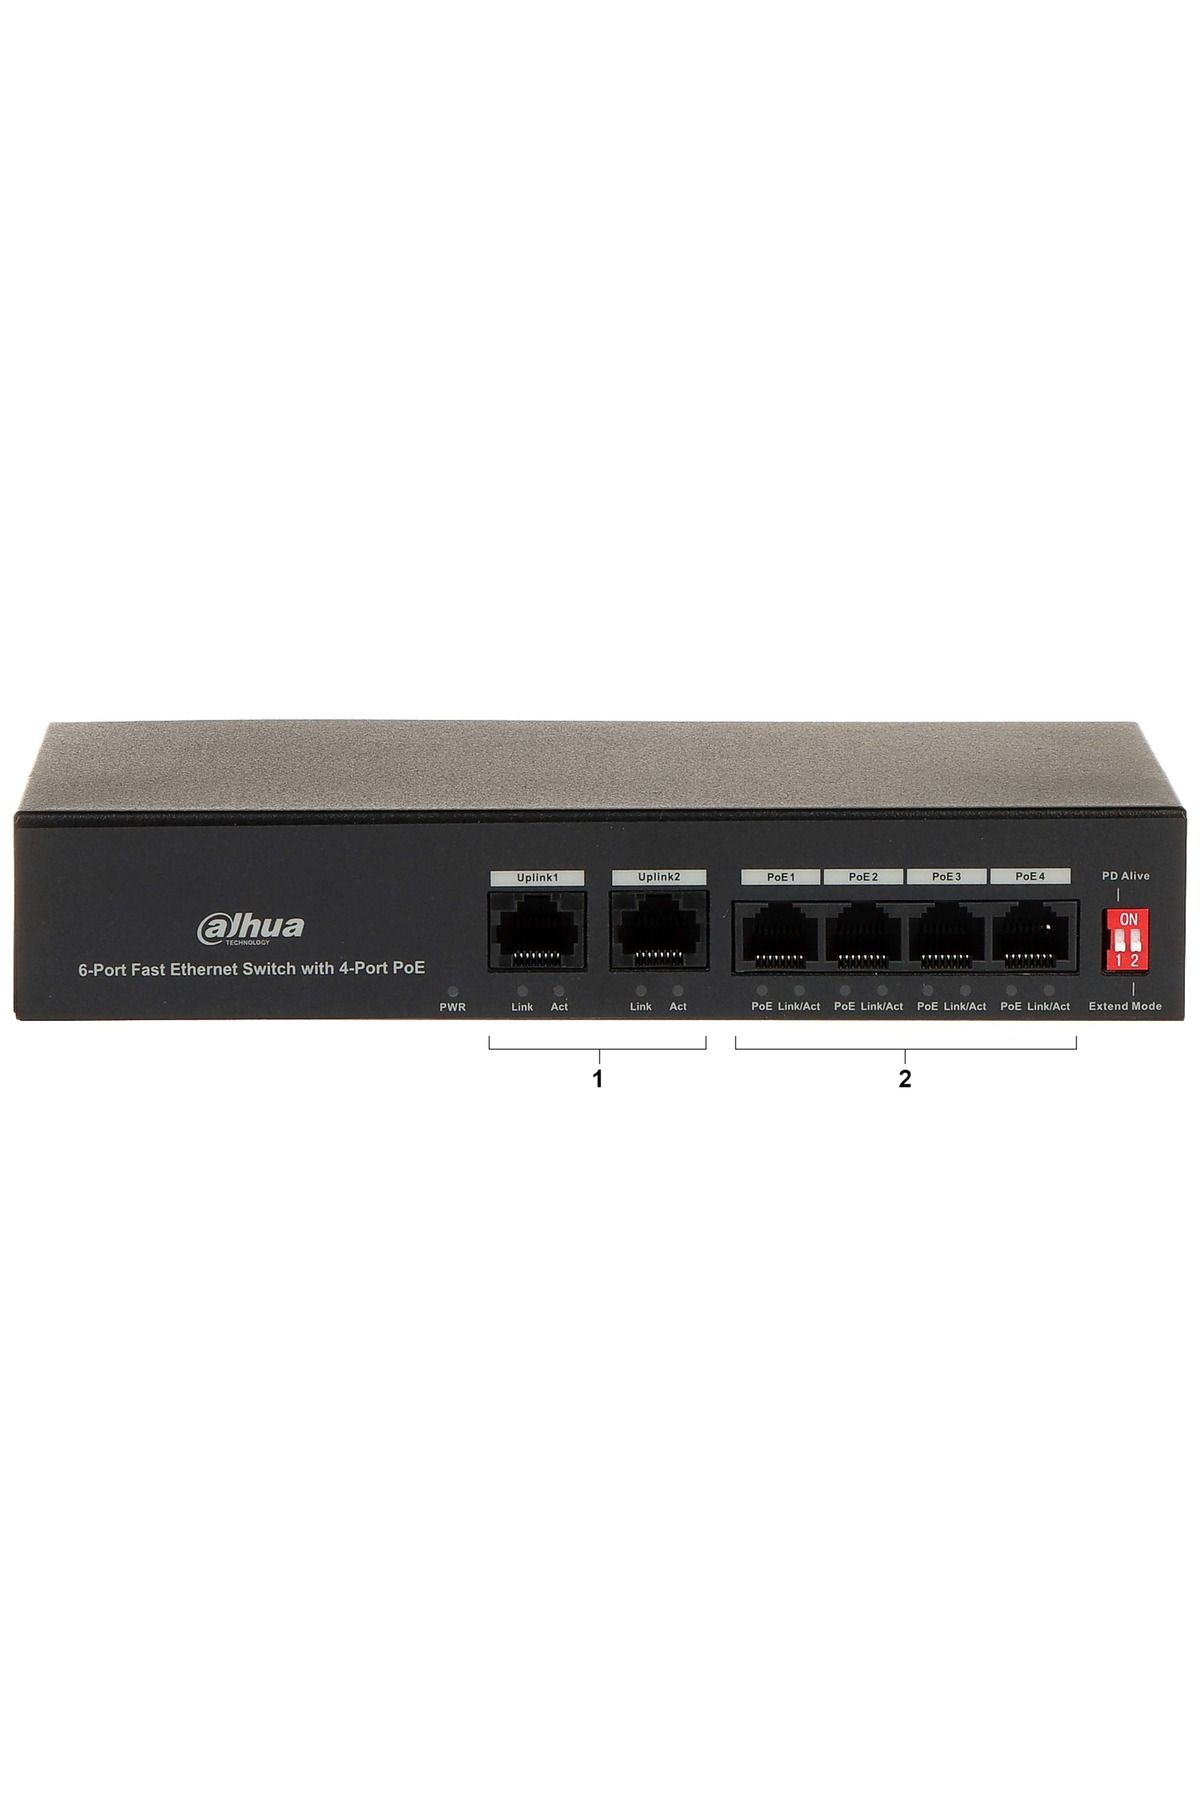 Dahua DH-PFS3006-4ET-36 4+2 Port Fast Ethernet Switch with 4 Port PoE